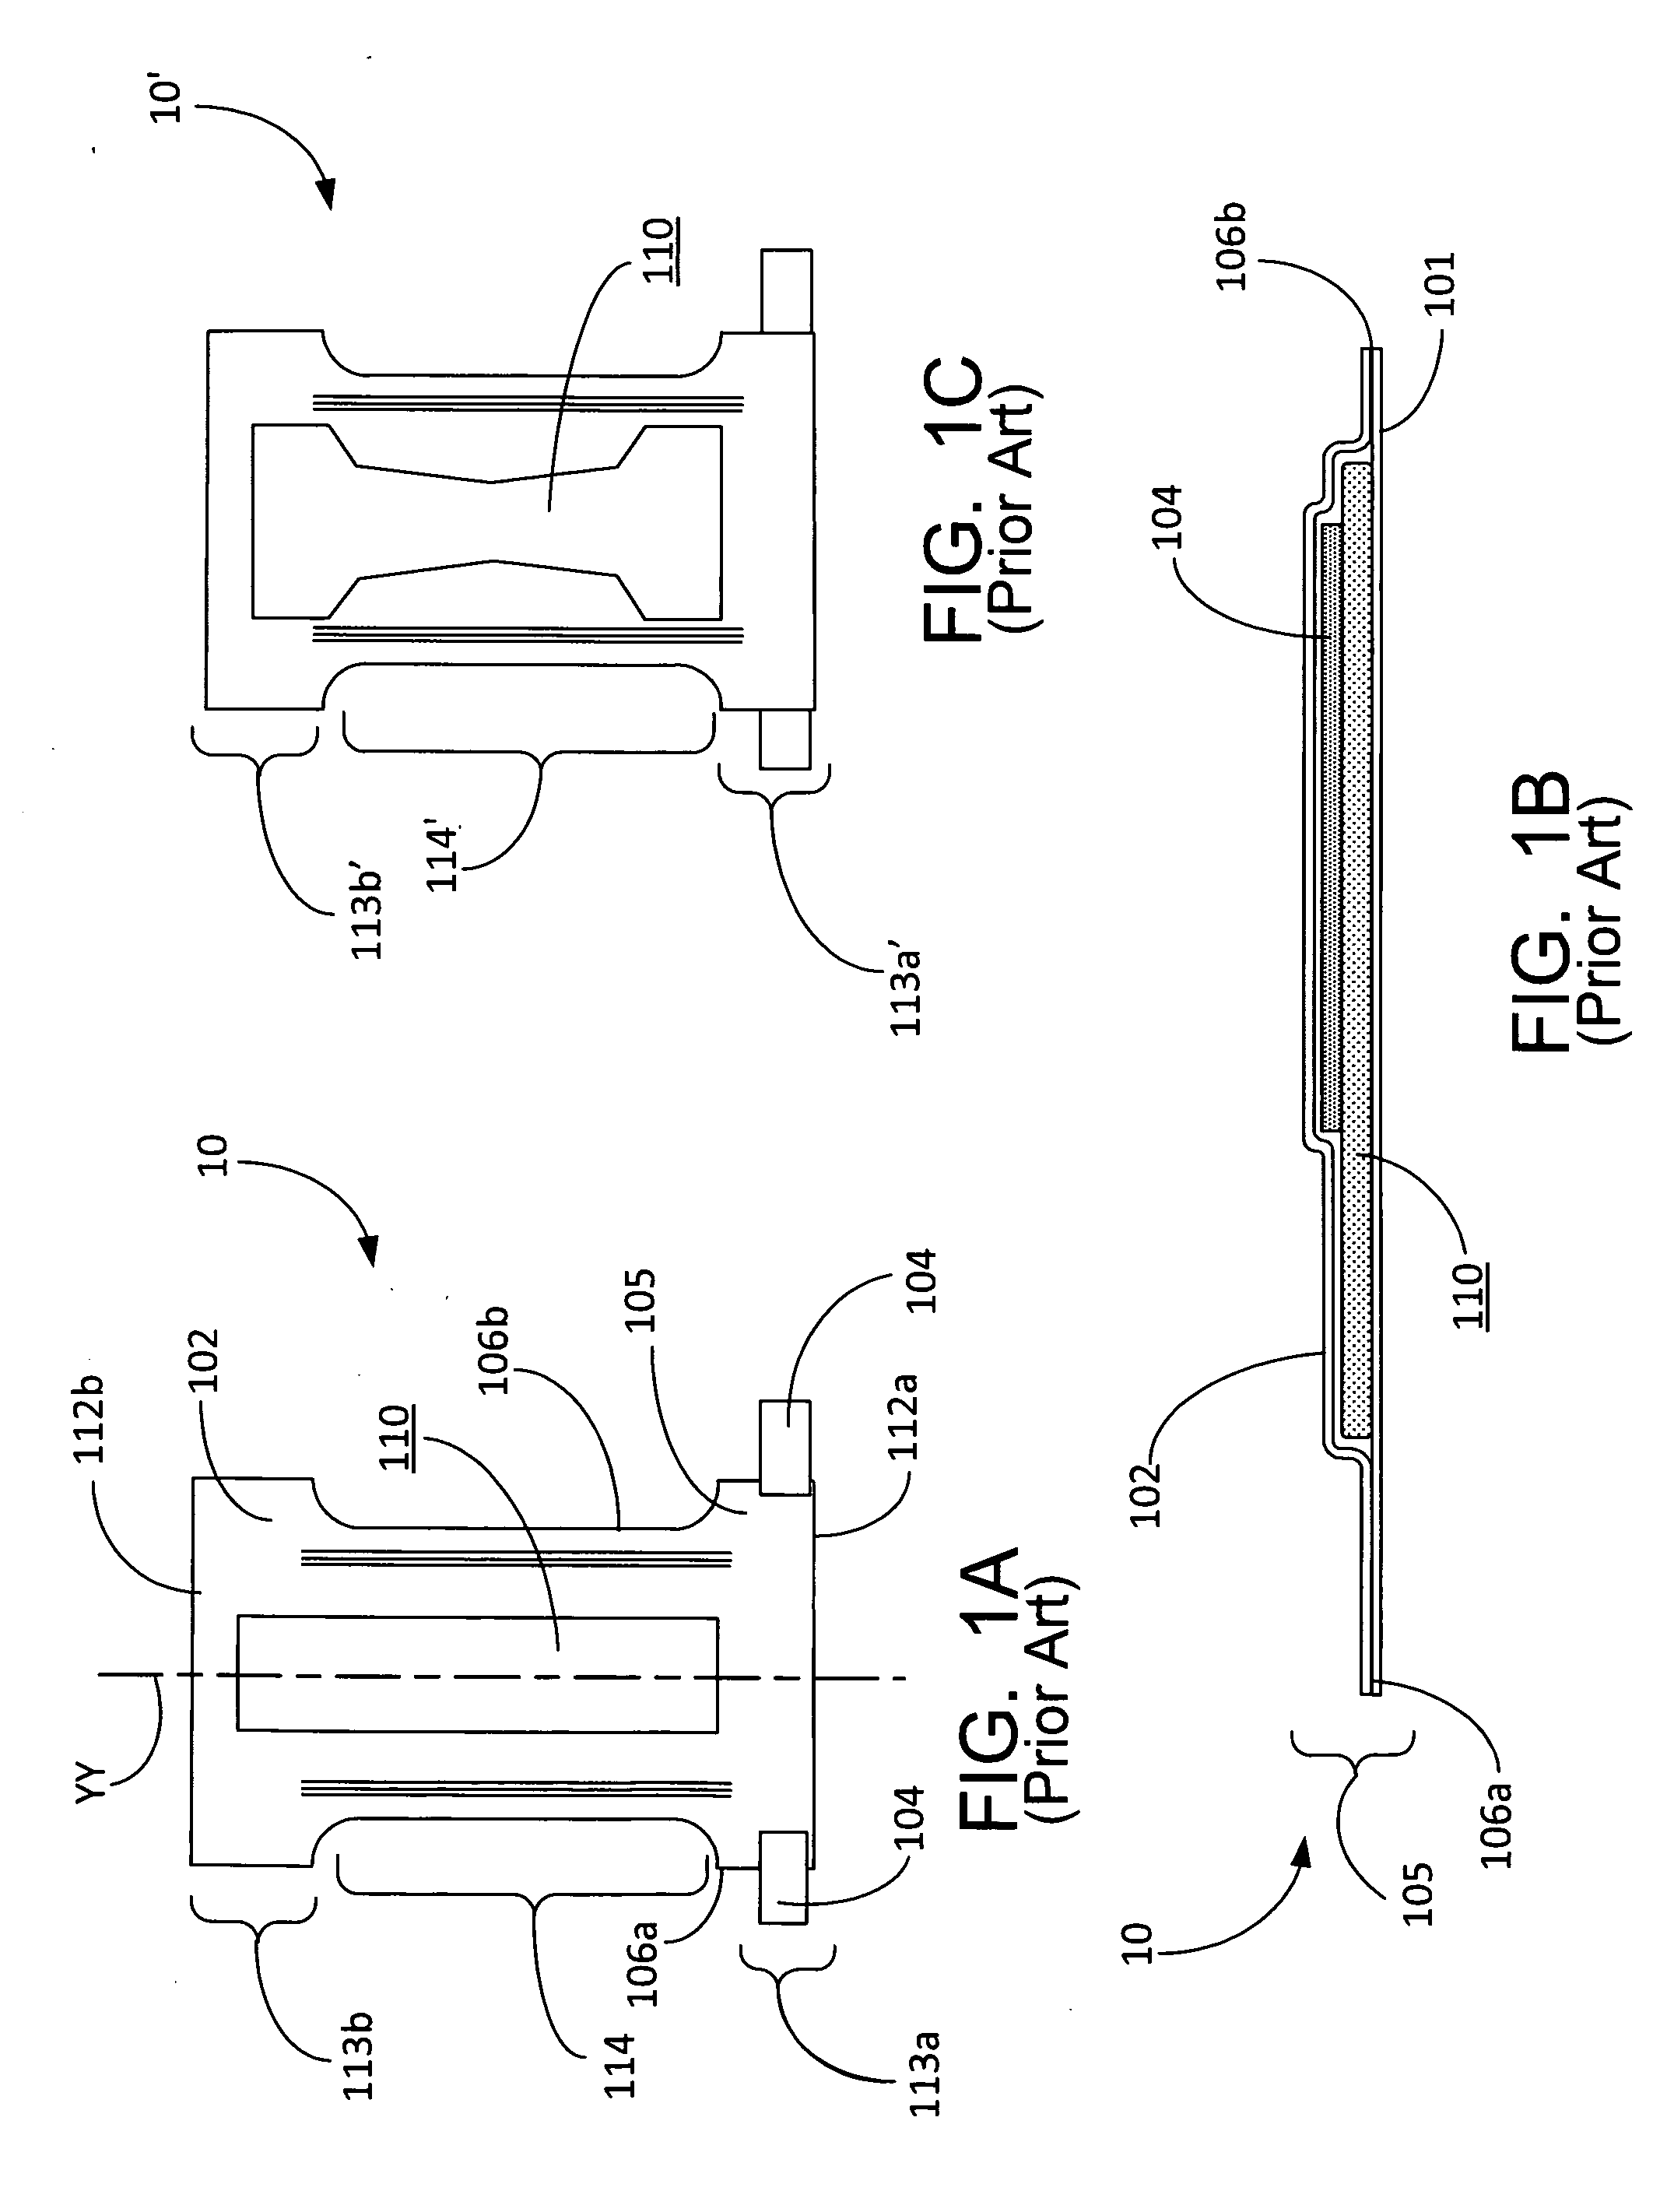 Disposable absorbent article with profiled absorbent core